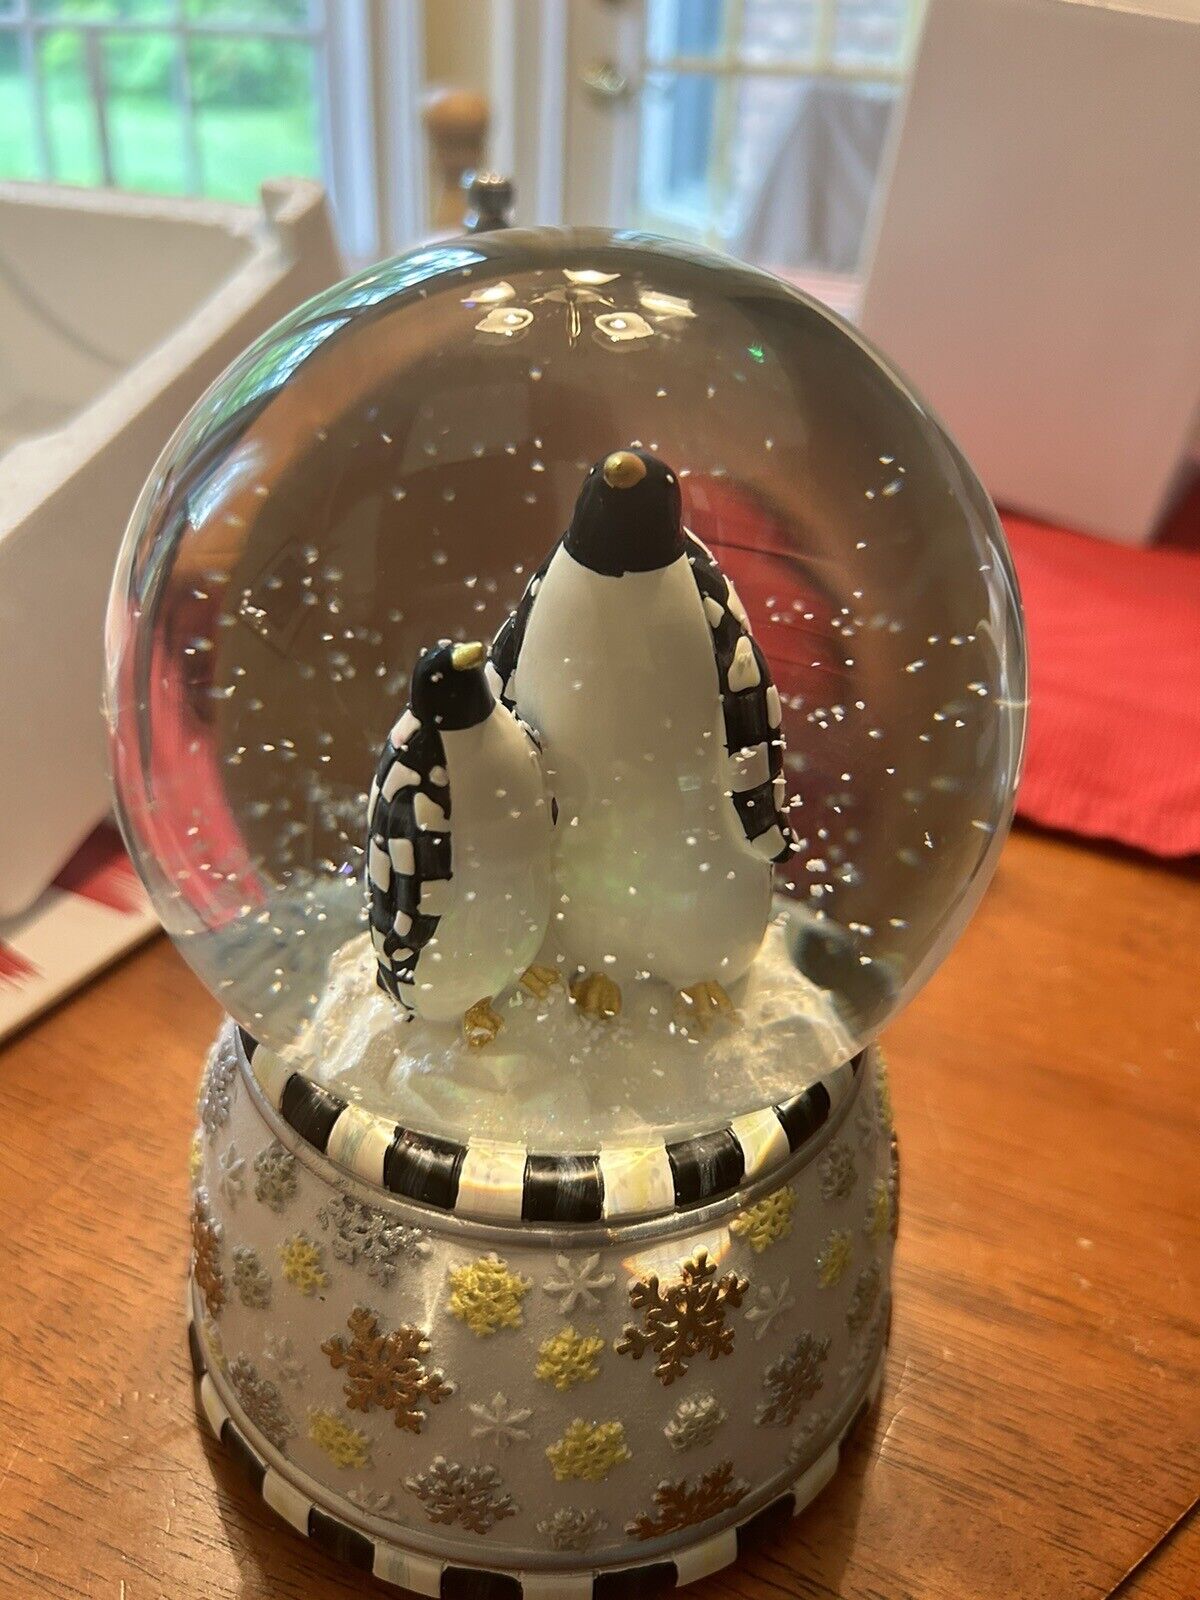 MACKENZIE-CHILDS COURTLY CHECK PENGUINS MUSICAL SNOW GLOBE - NEW IN BOX